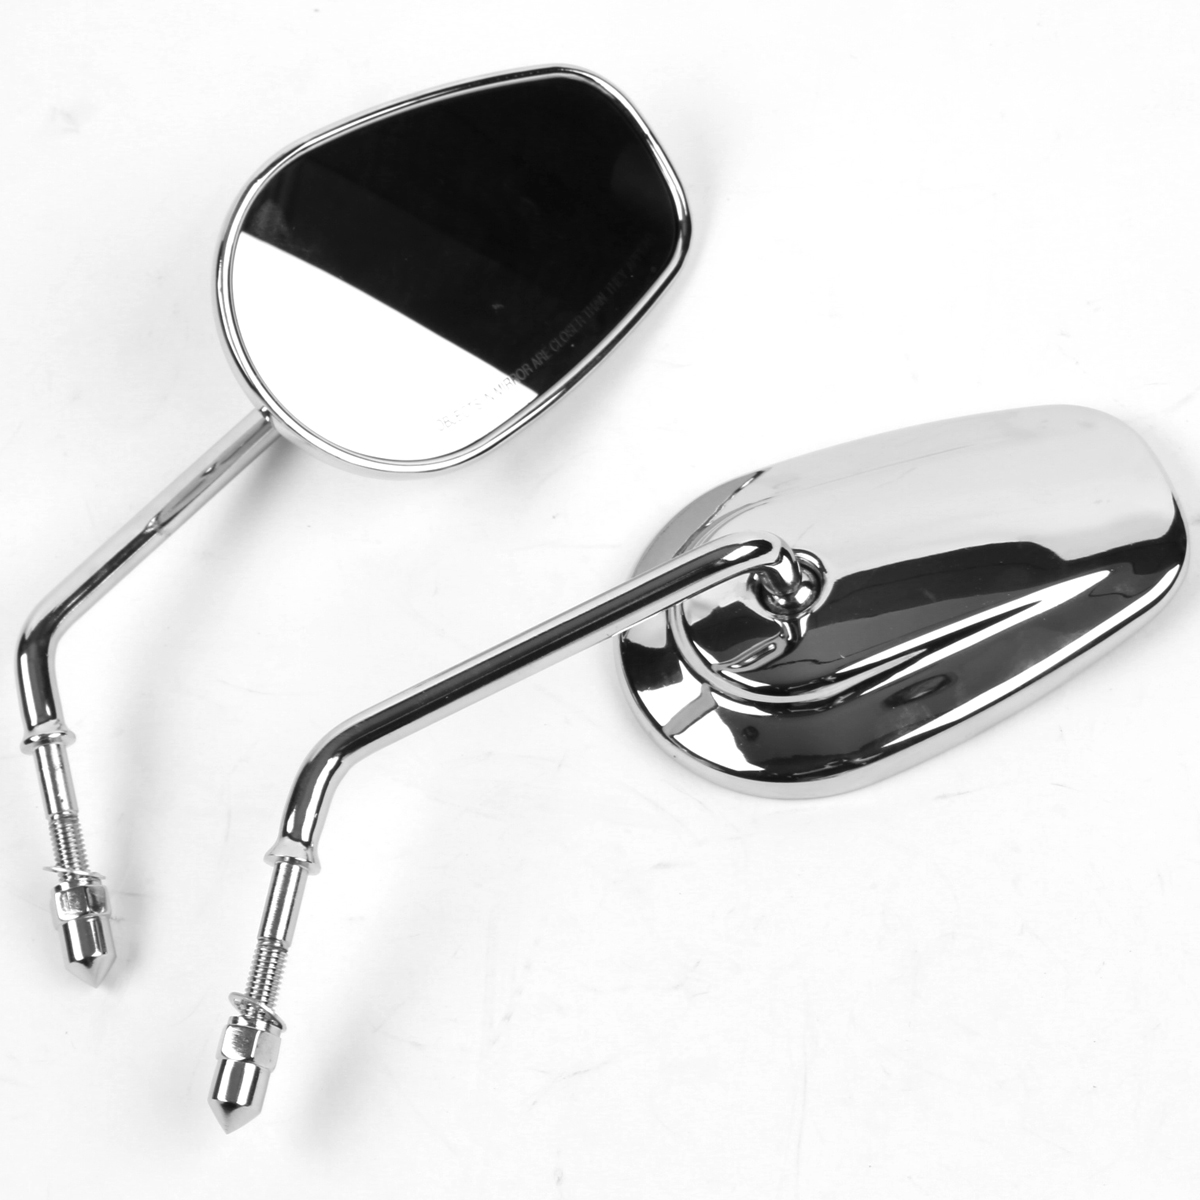 Chrome Teardrop Rearview Mirrors fit For Harley Road King Fatboy Touring XL 883